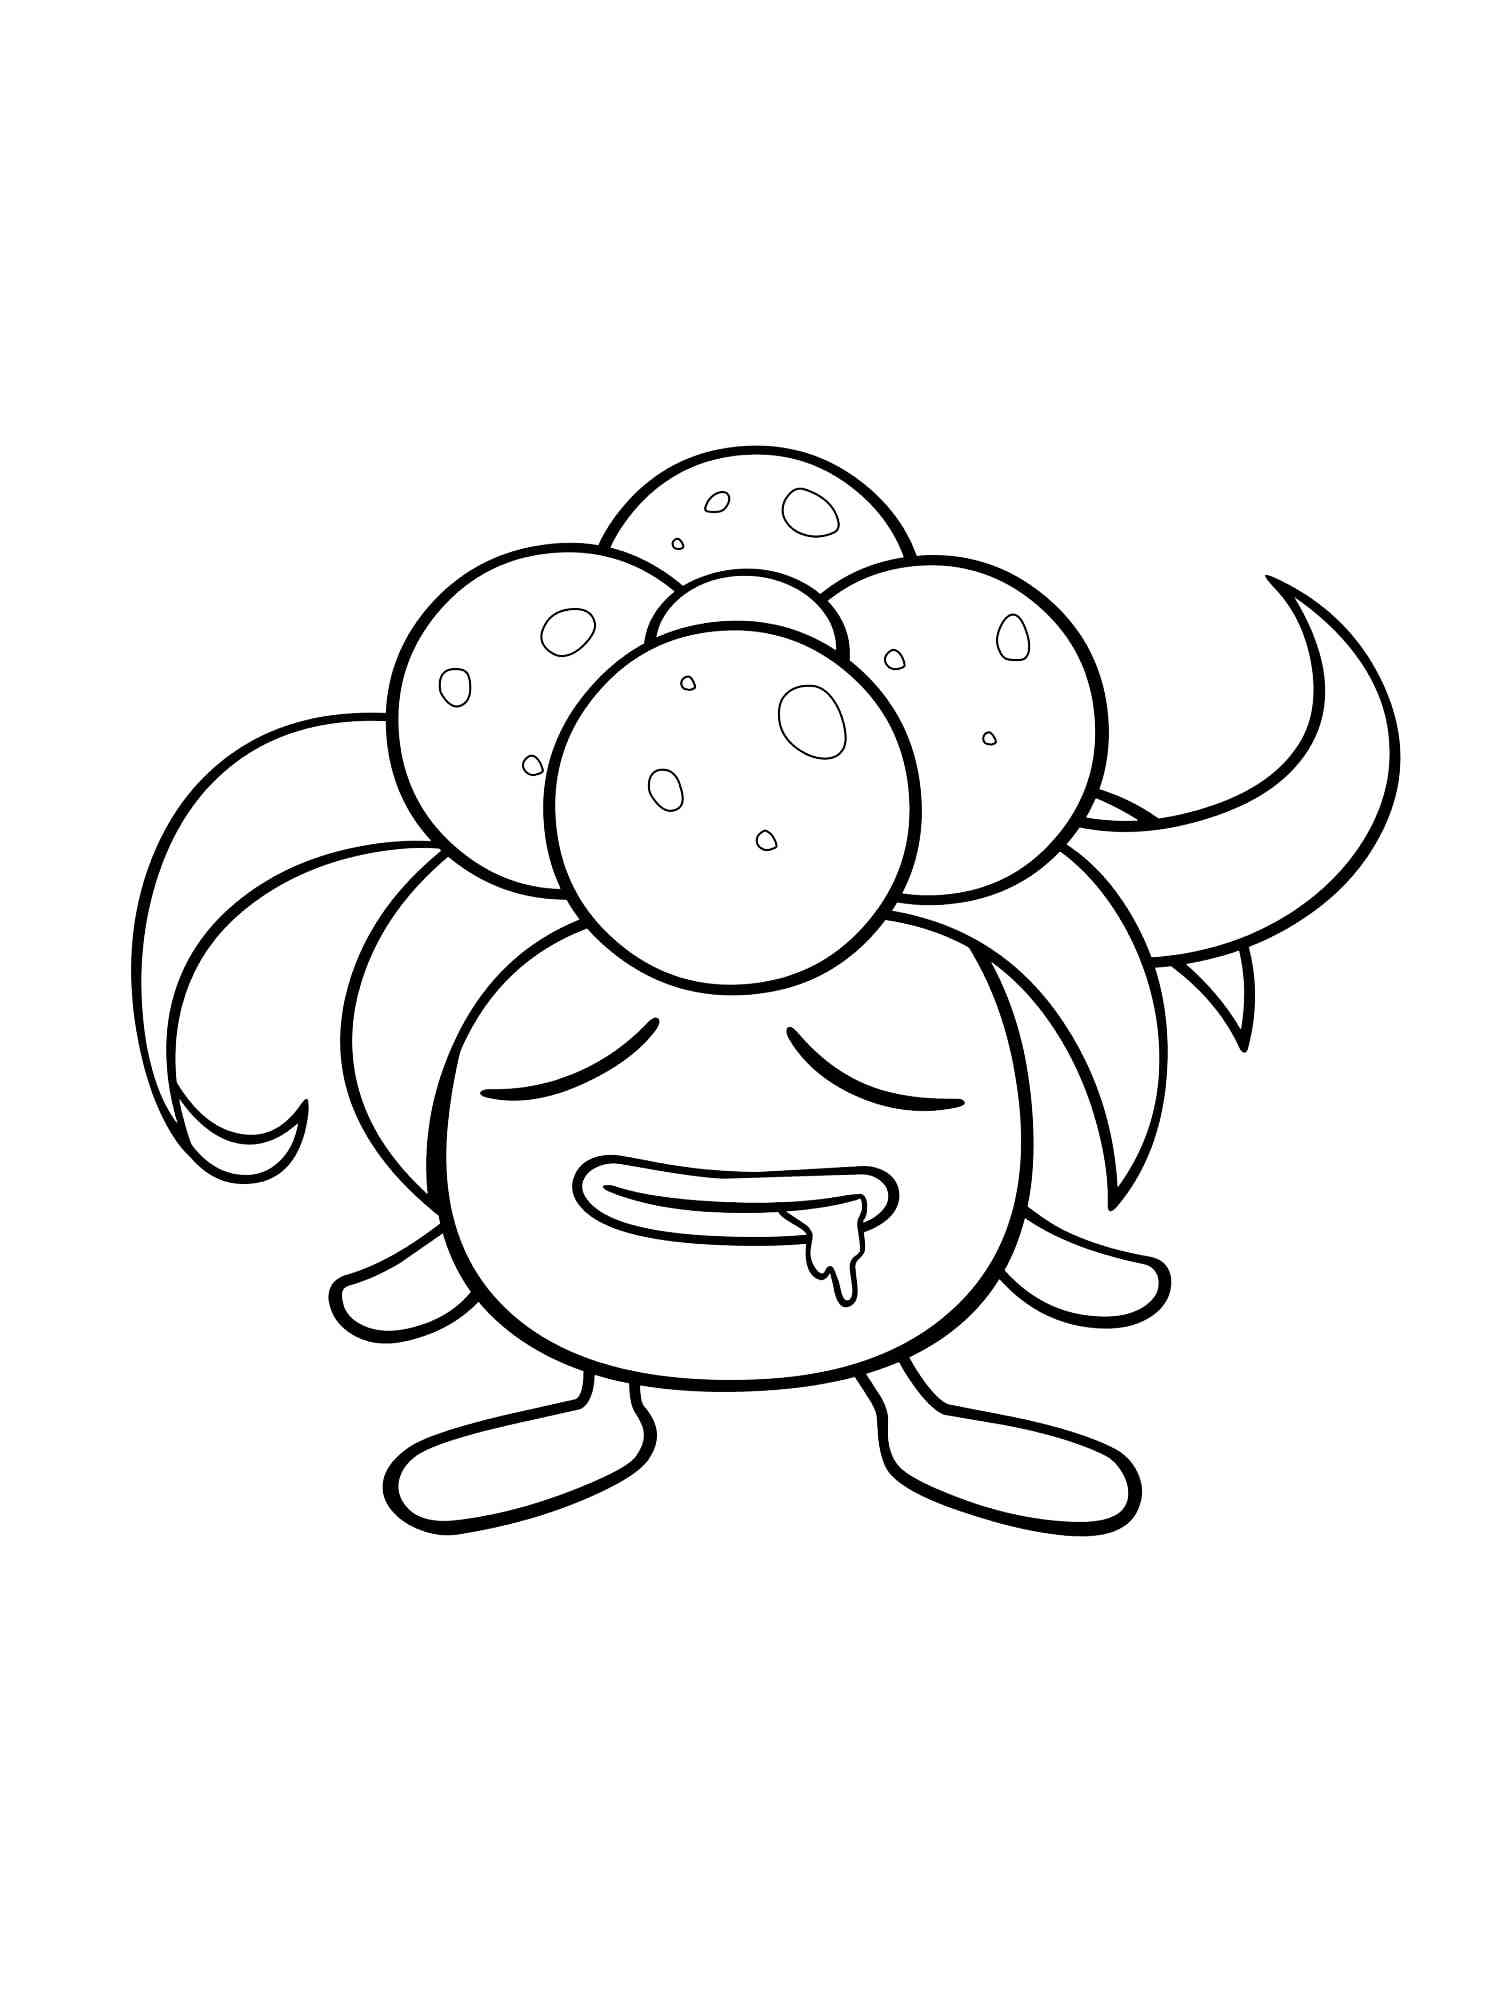 Pokemon Gloom coloring pages - Free Printable